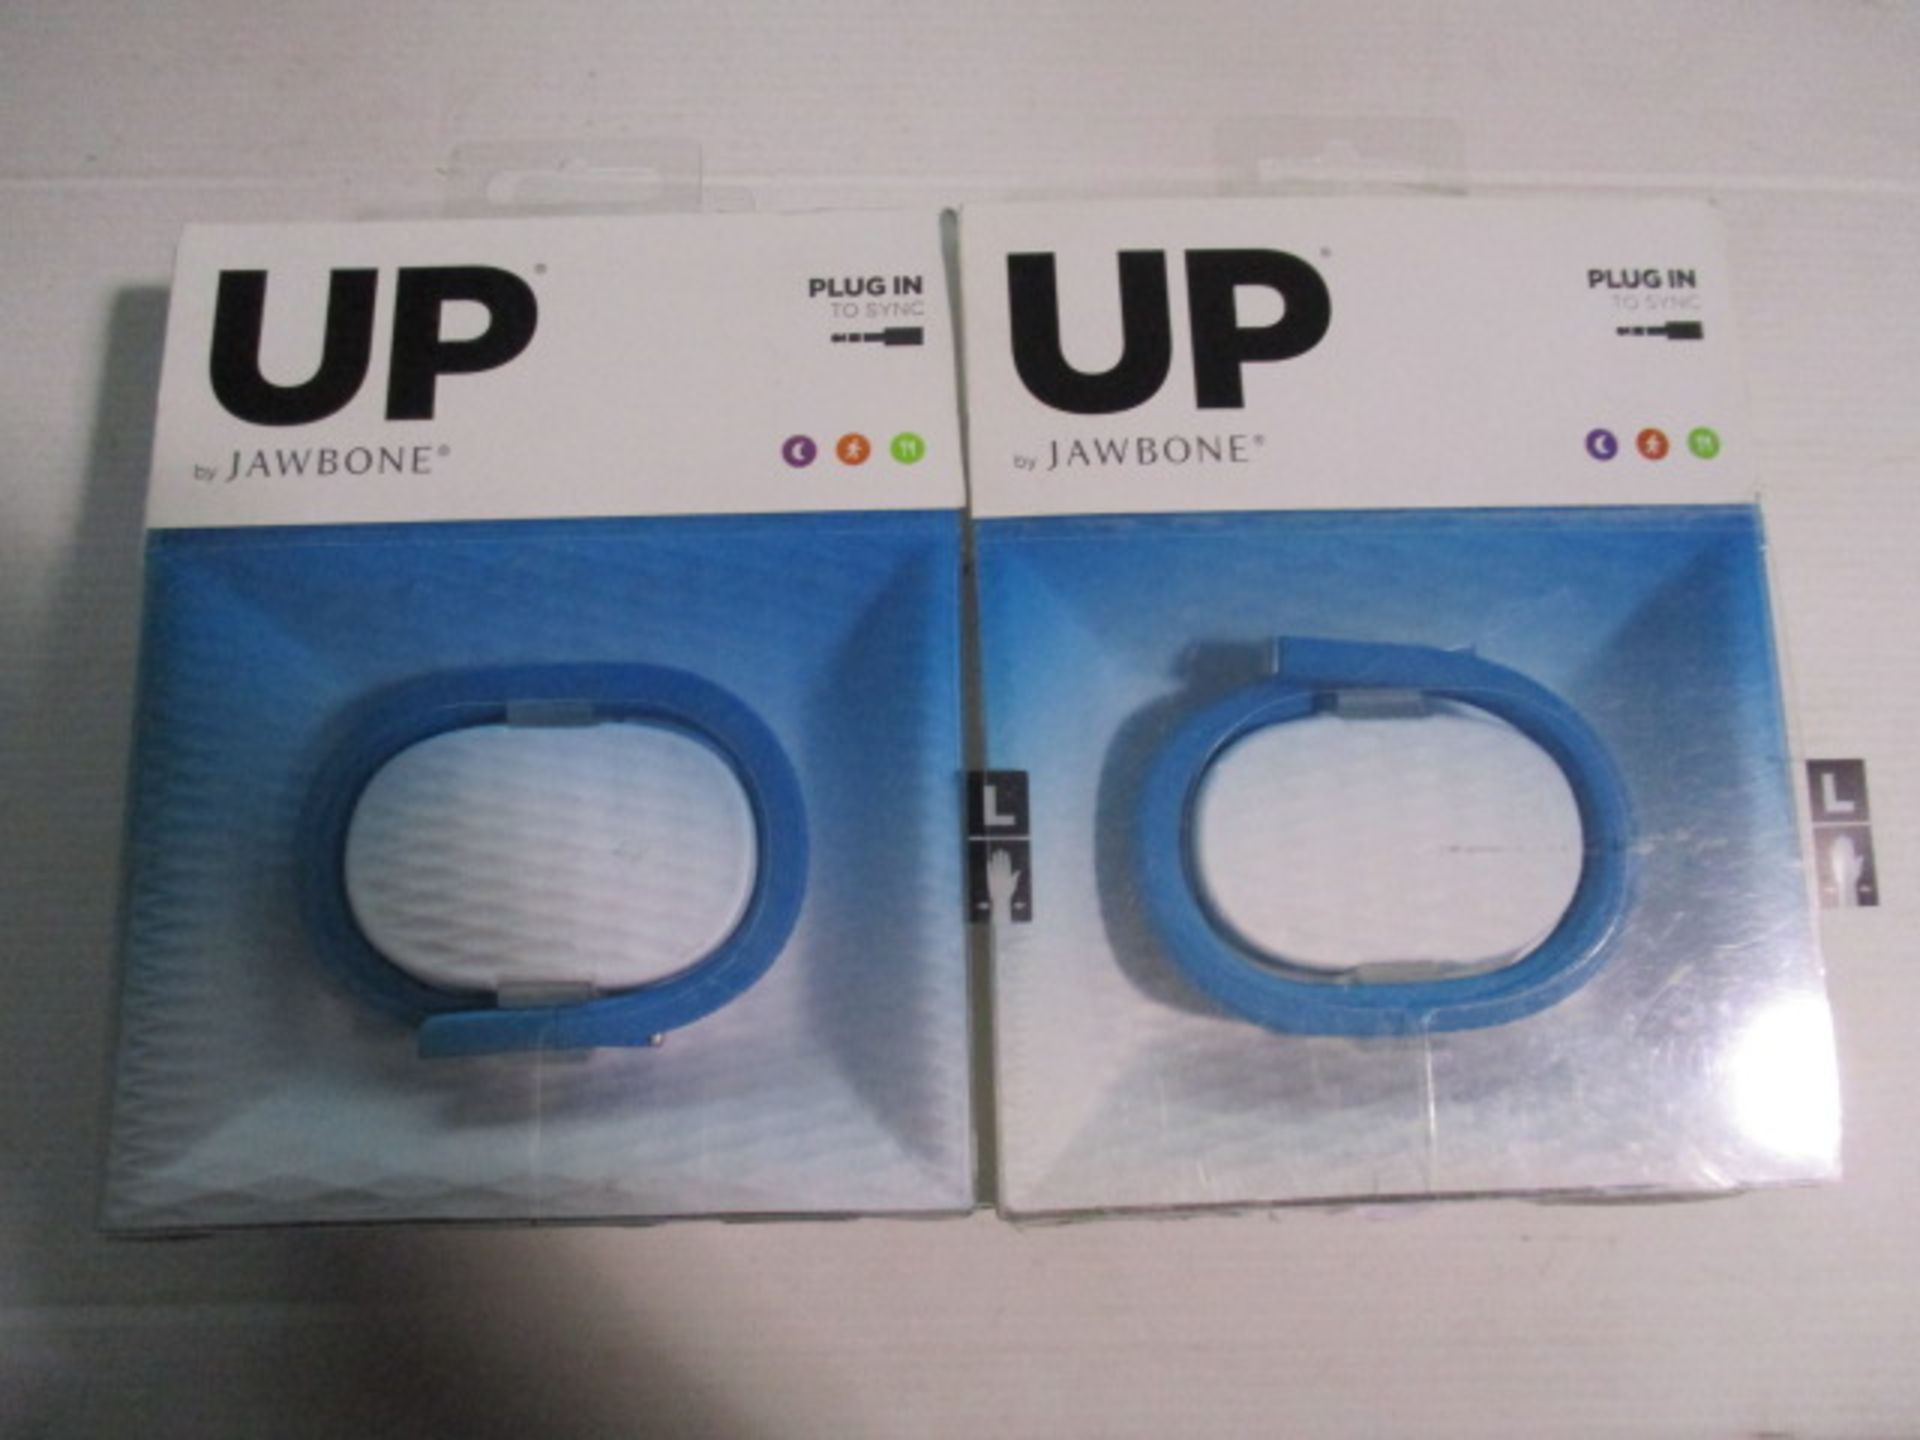 2 x UP by Jawbone systems as pictured boxed and unchecked